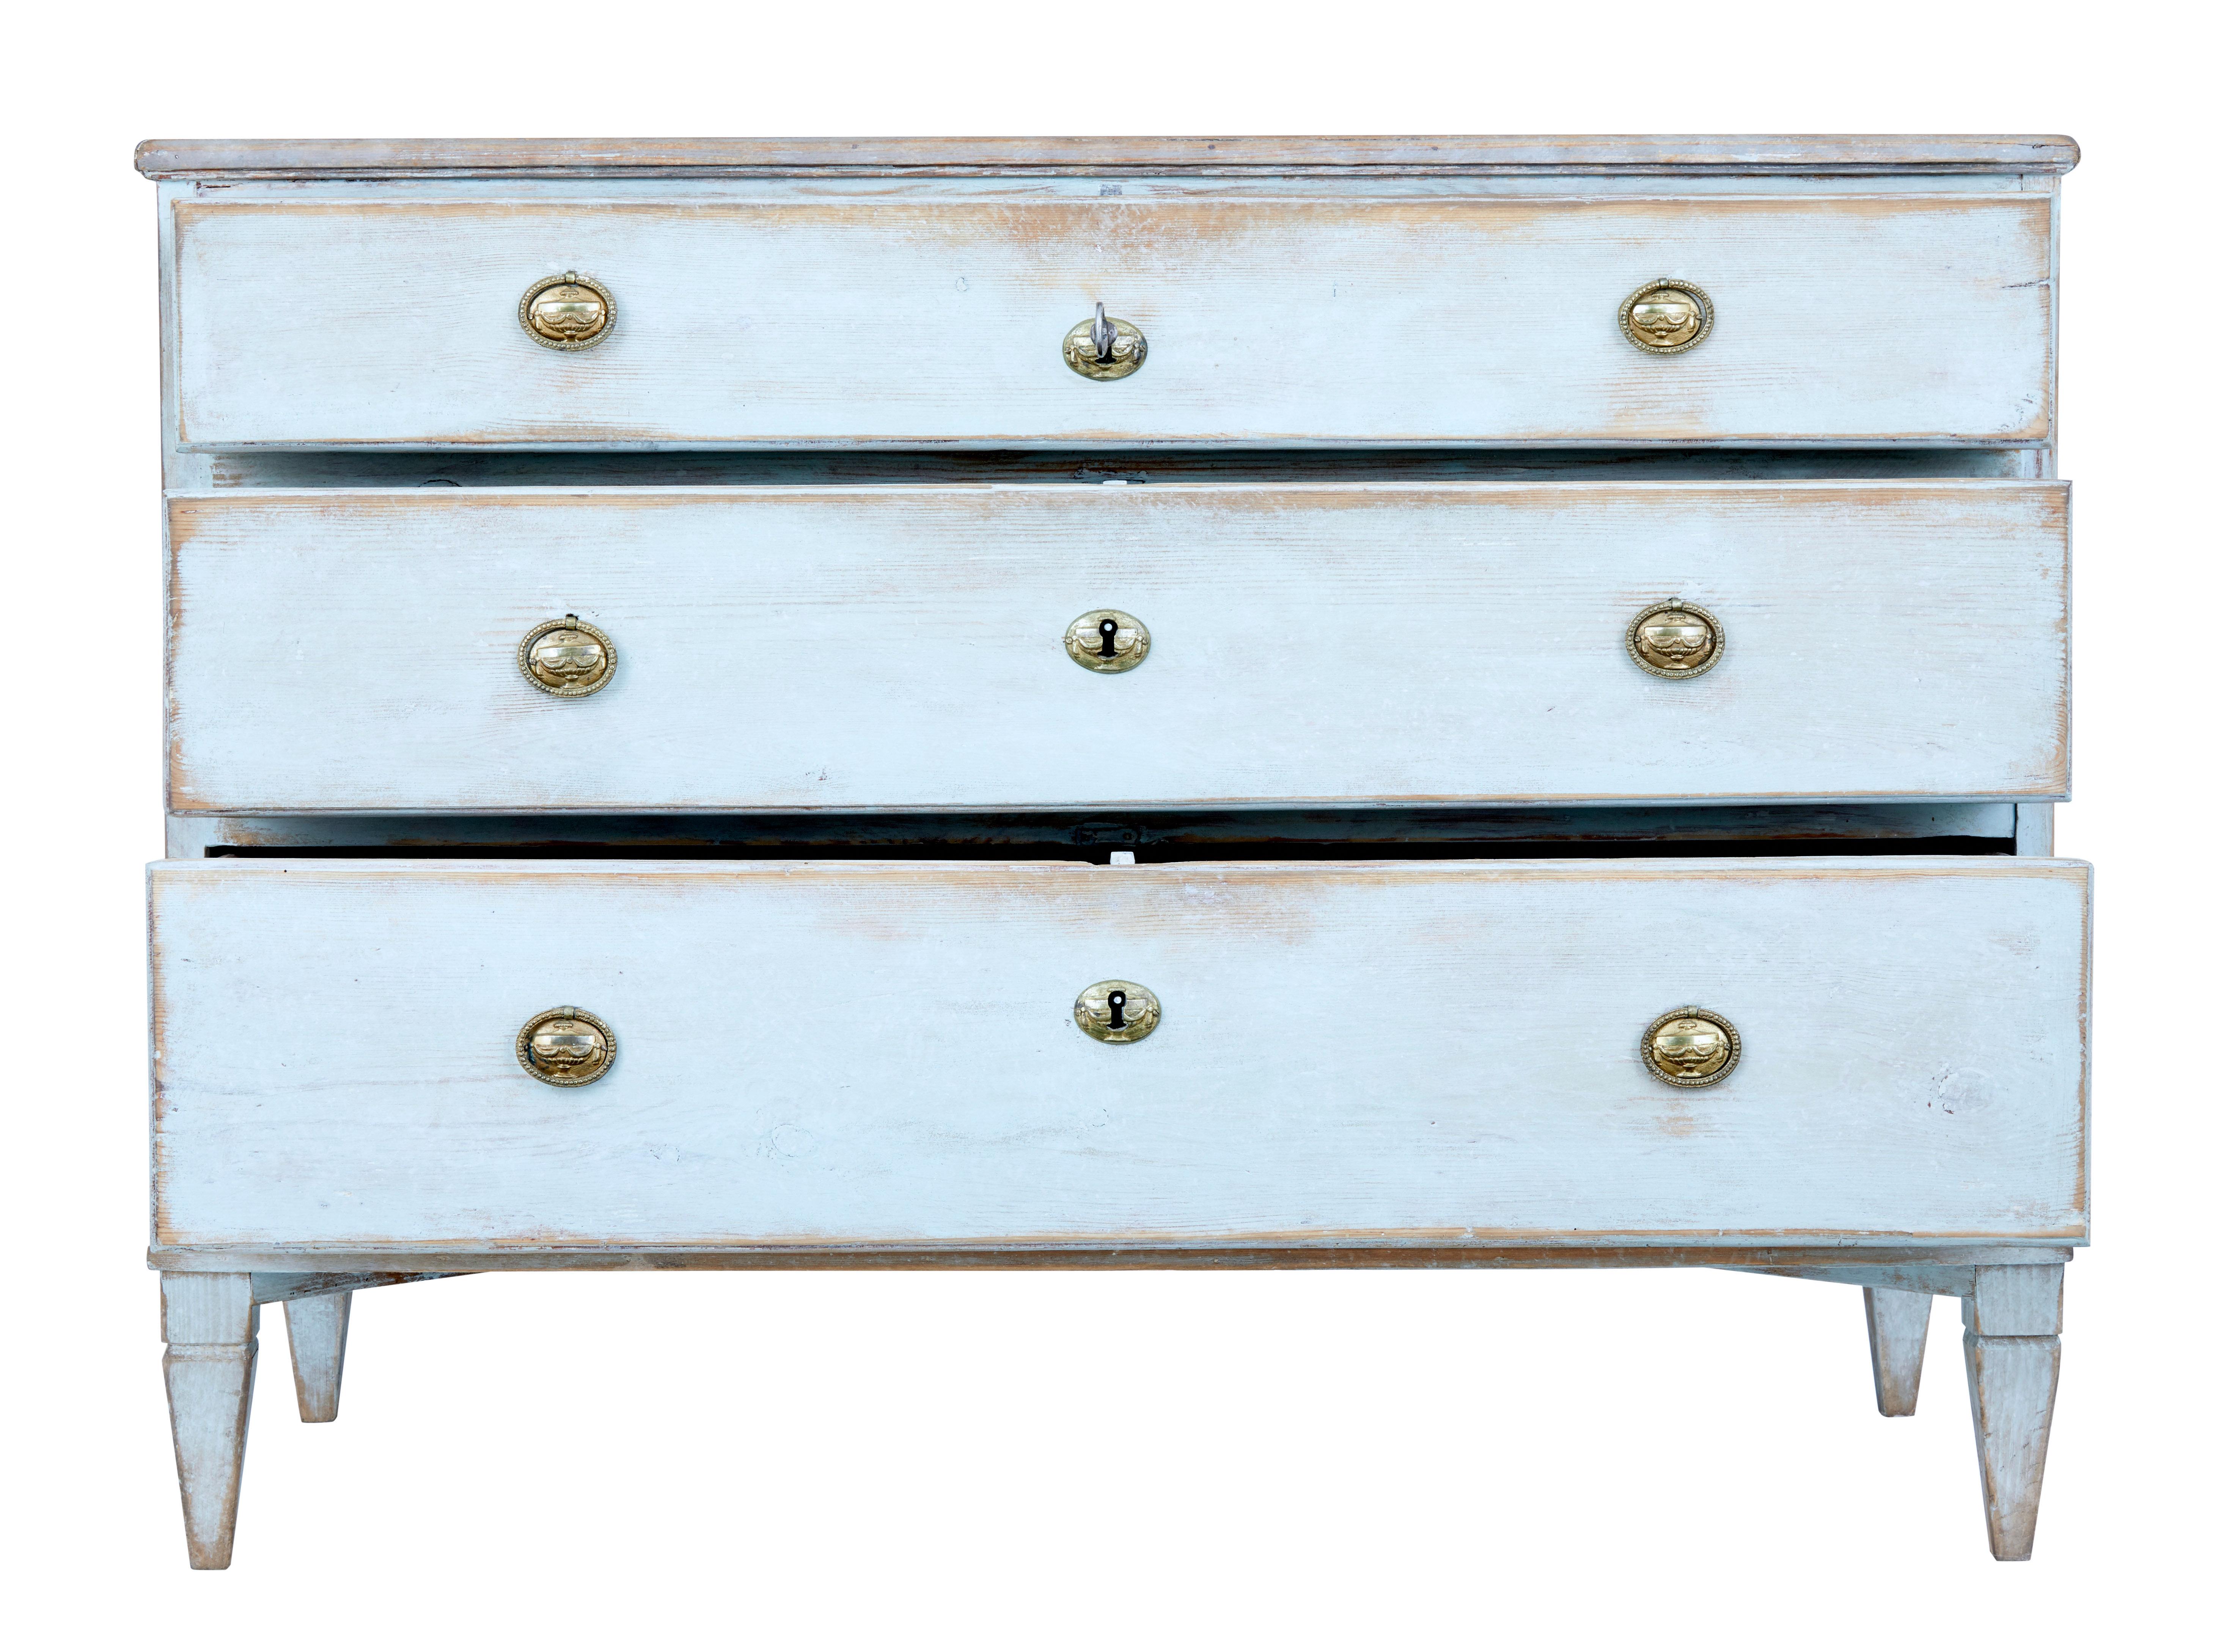 Rustic Mid-19th Century Painted Swedish Pine Chest of Drawers